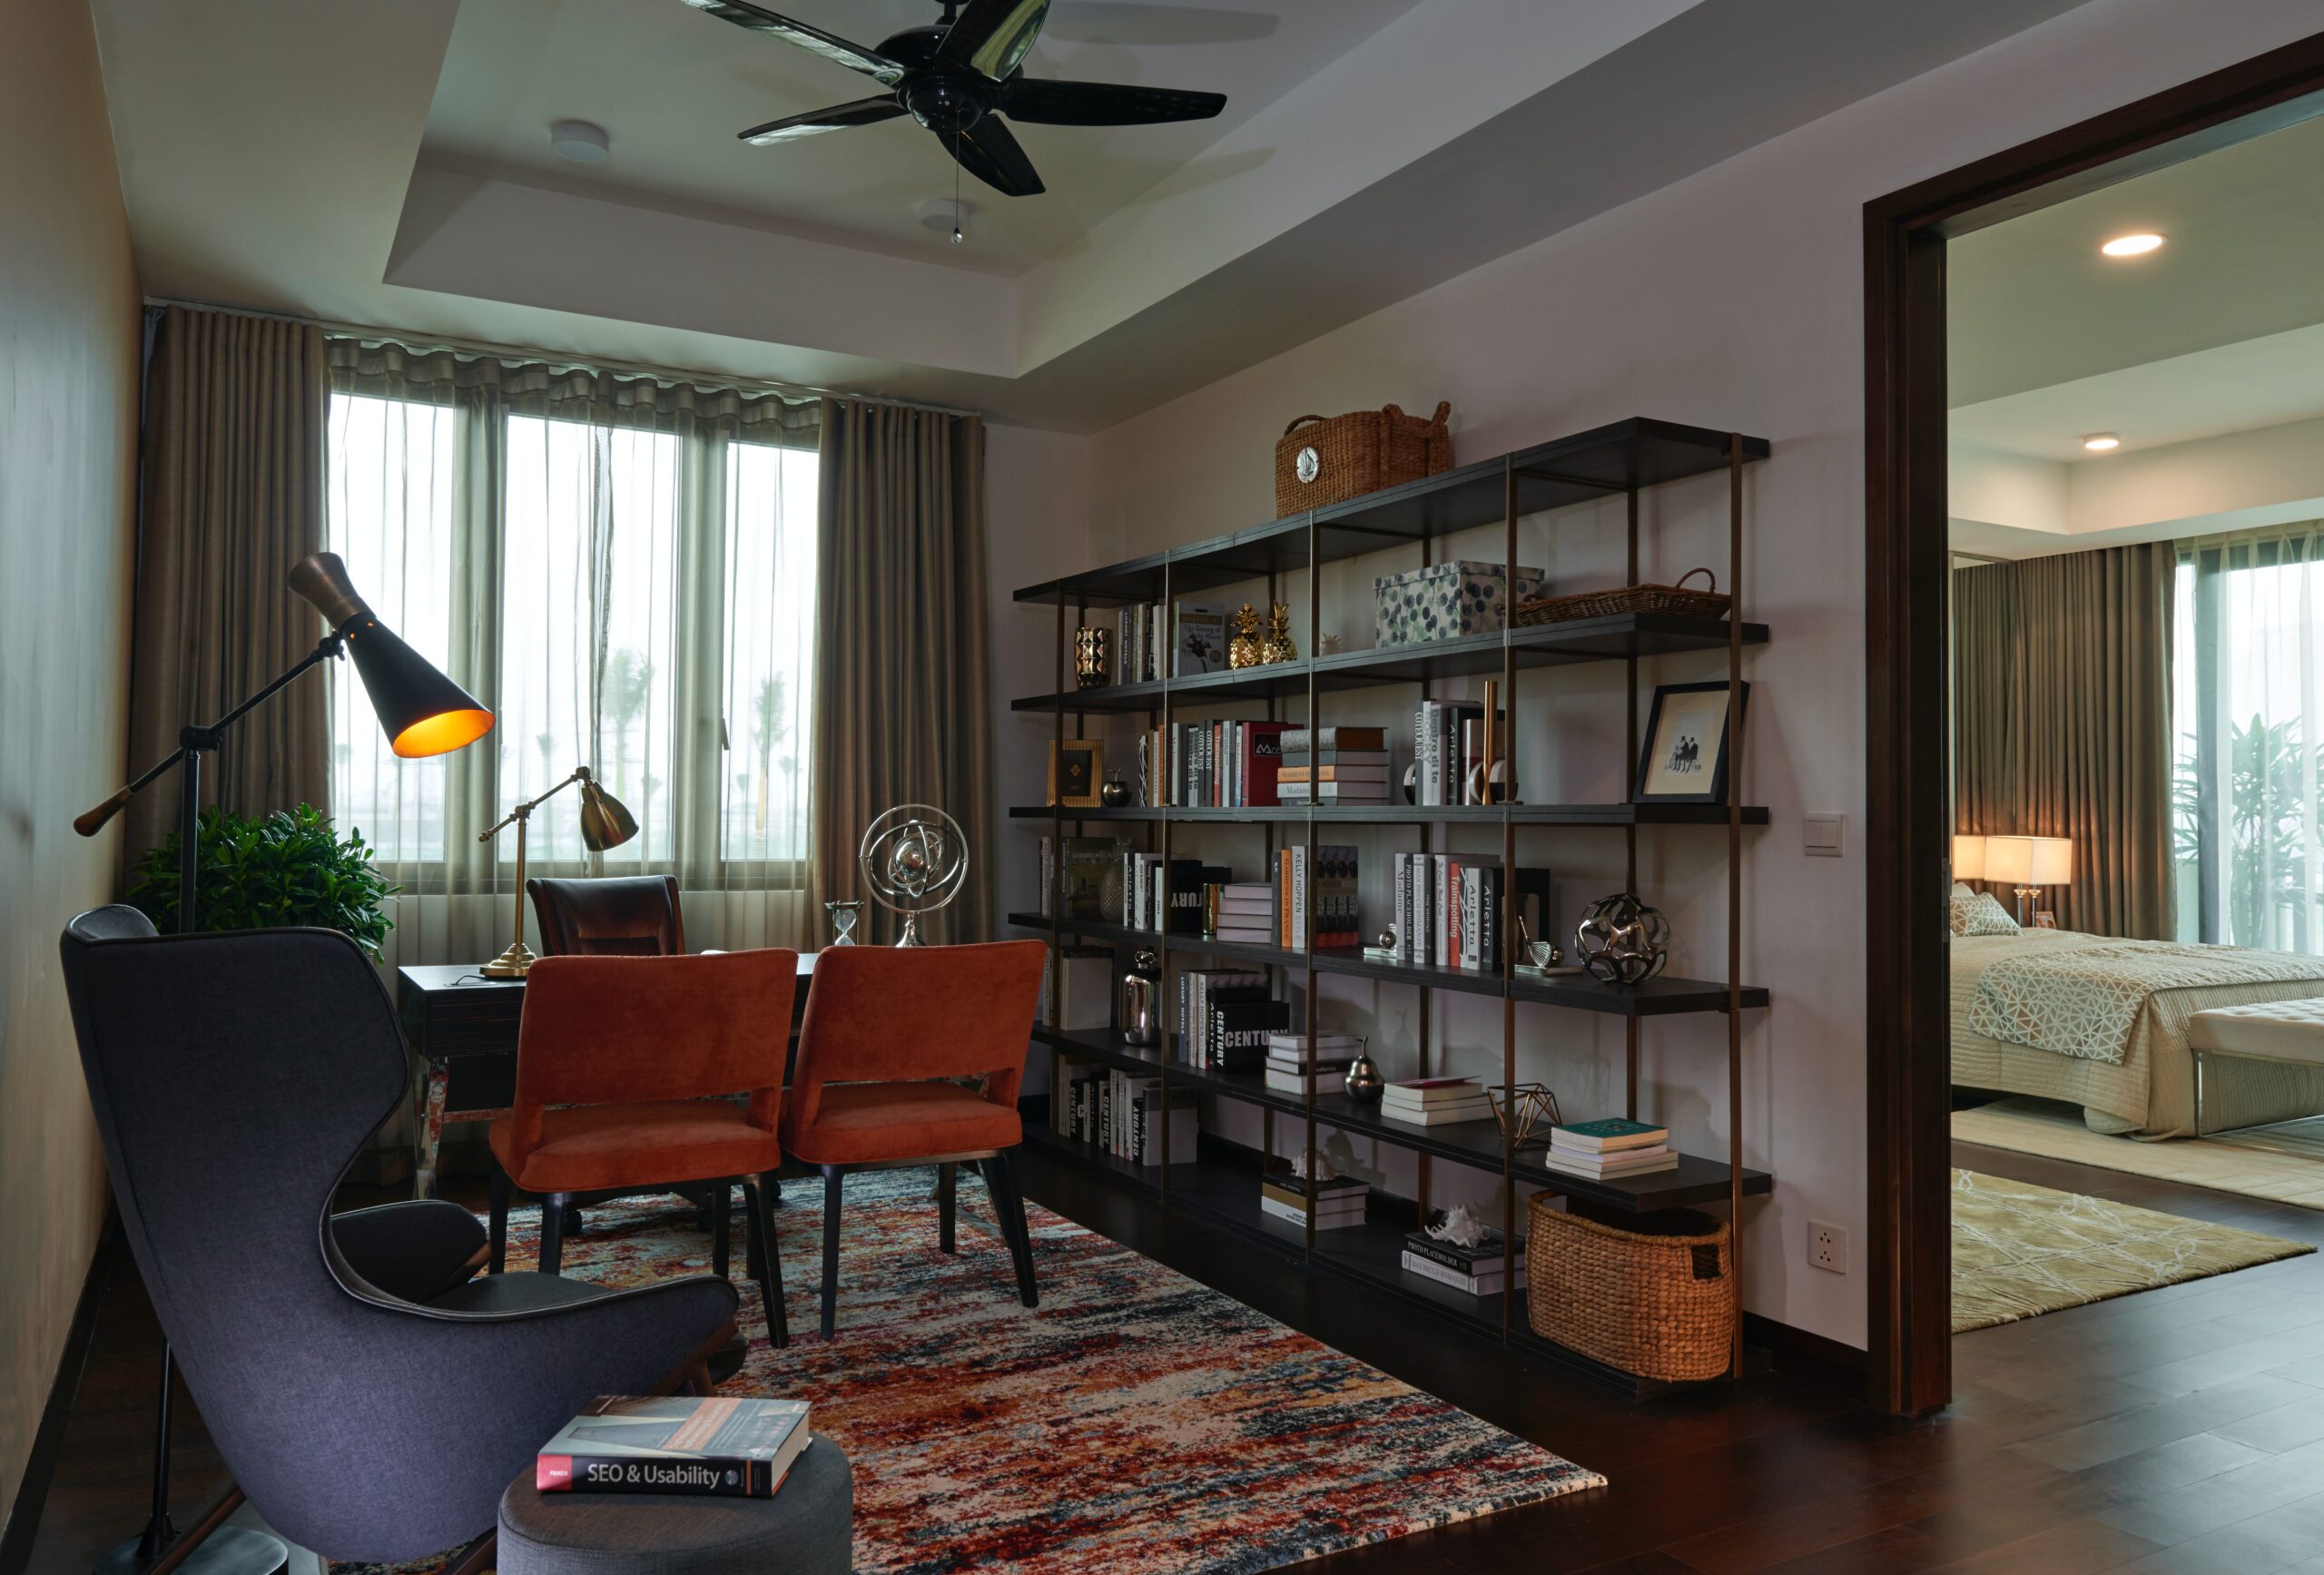 Utilize built-in shelving for storage, displaying art work and decor and as your home office background. Pictured: A home office